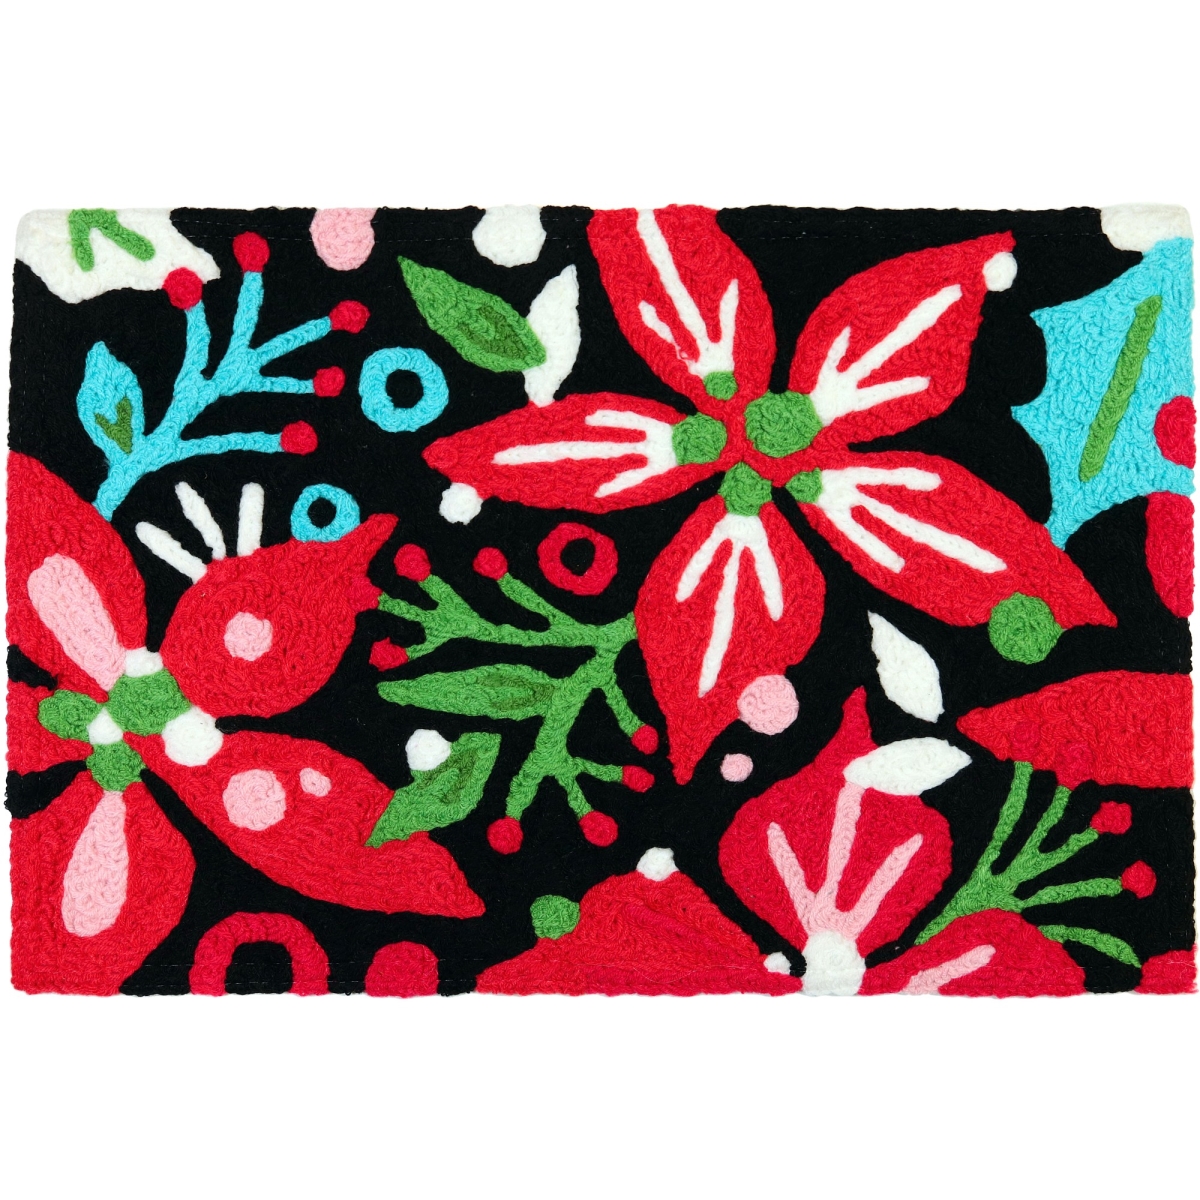 Perspectiva 20 x 30 in. Merry Little Christmas Accent Rug